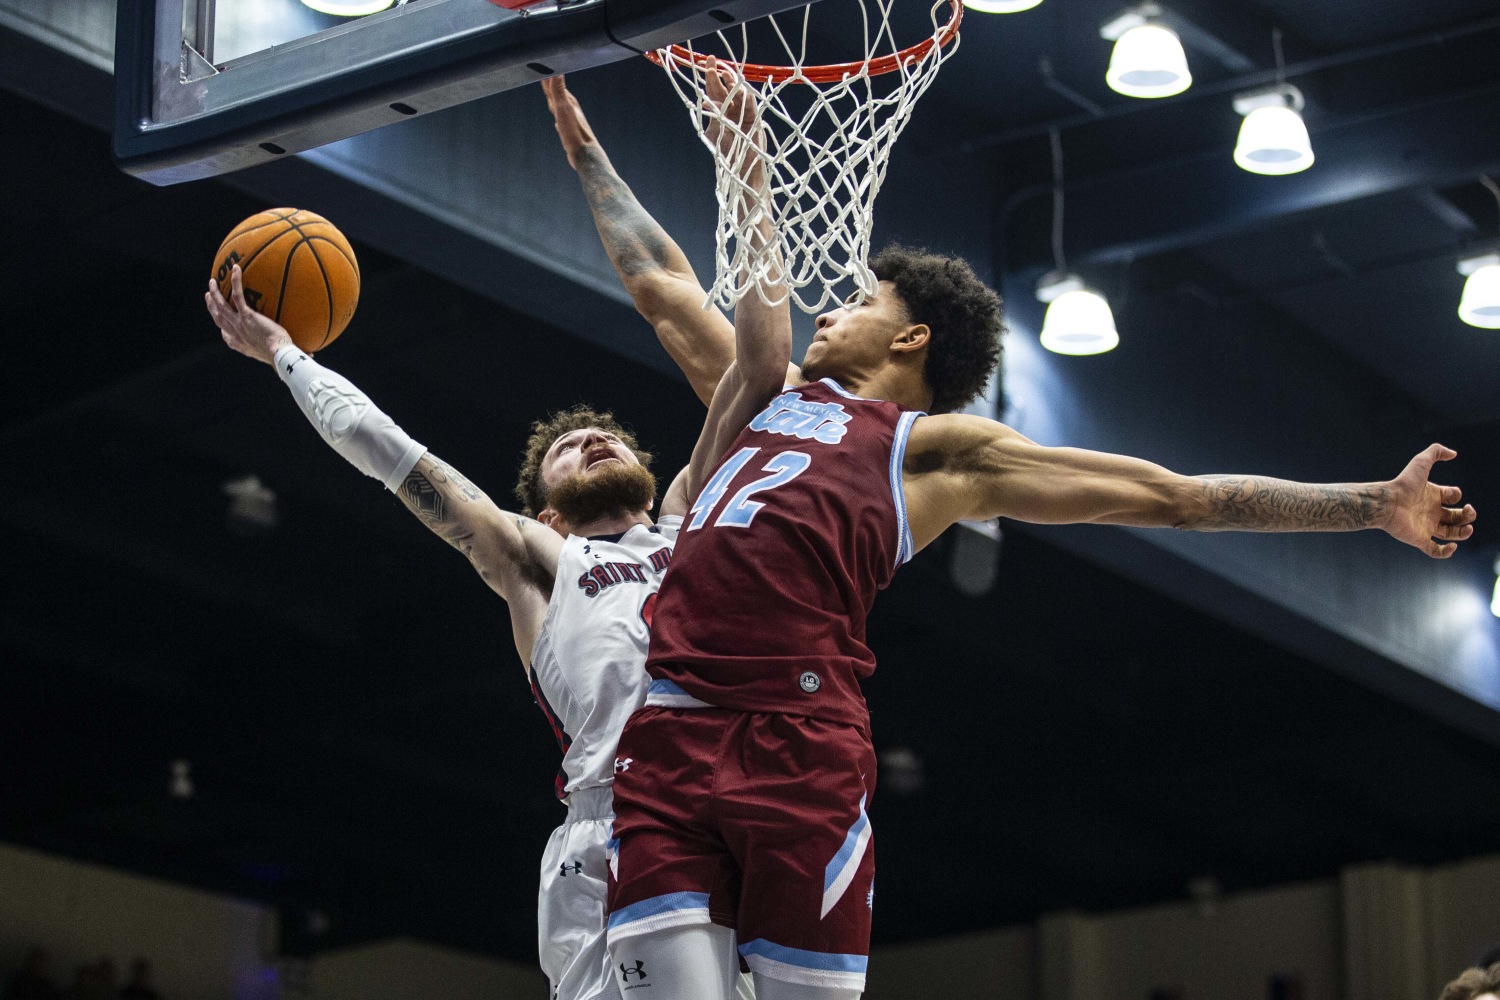 New Mexico State cancels men's basketball season